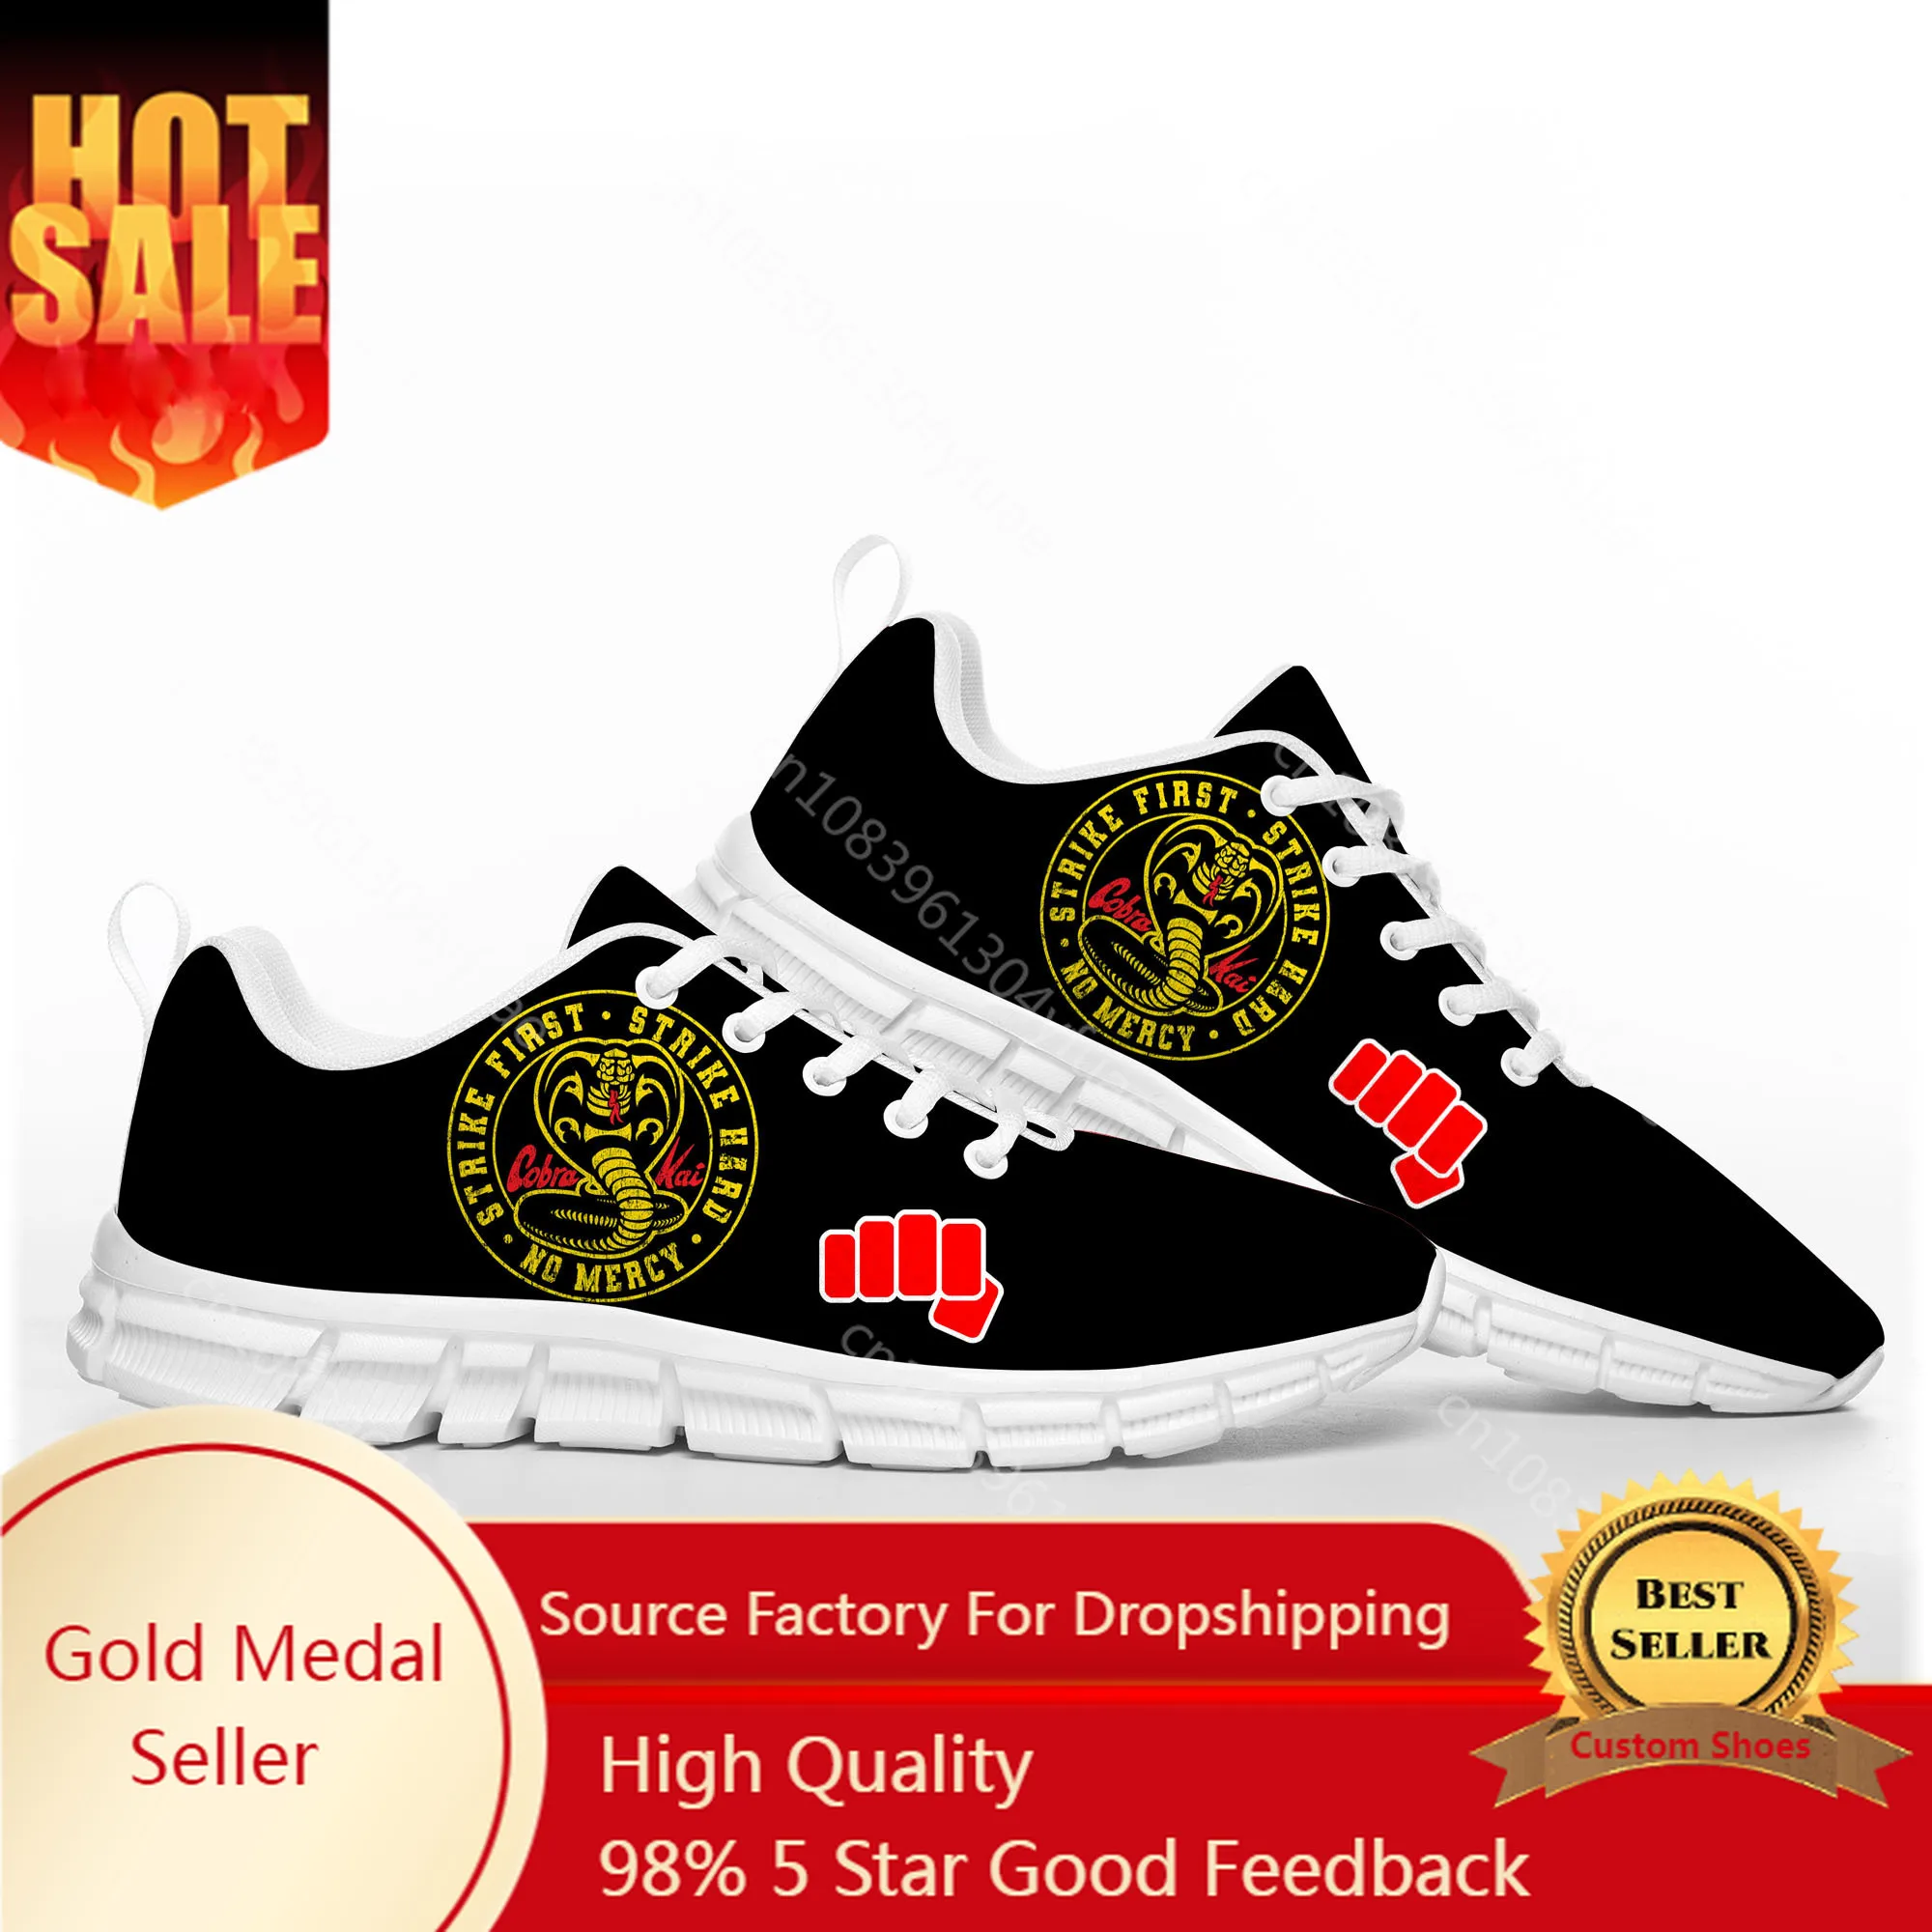 

Cobra Kai No Mercy Snake Movie Sports Shoes Mens Womens Teenager Kids Children Sneakers Casual Custom High Quality Couple Shoes